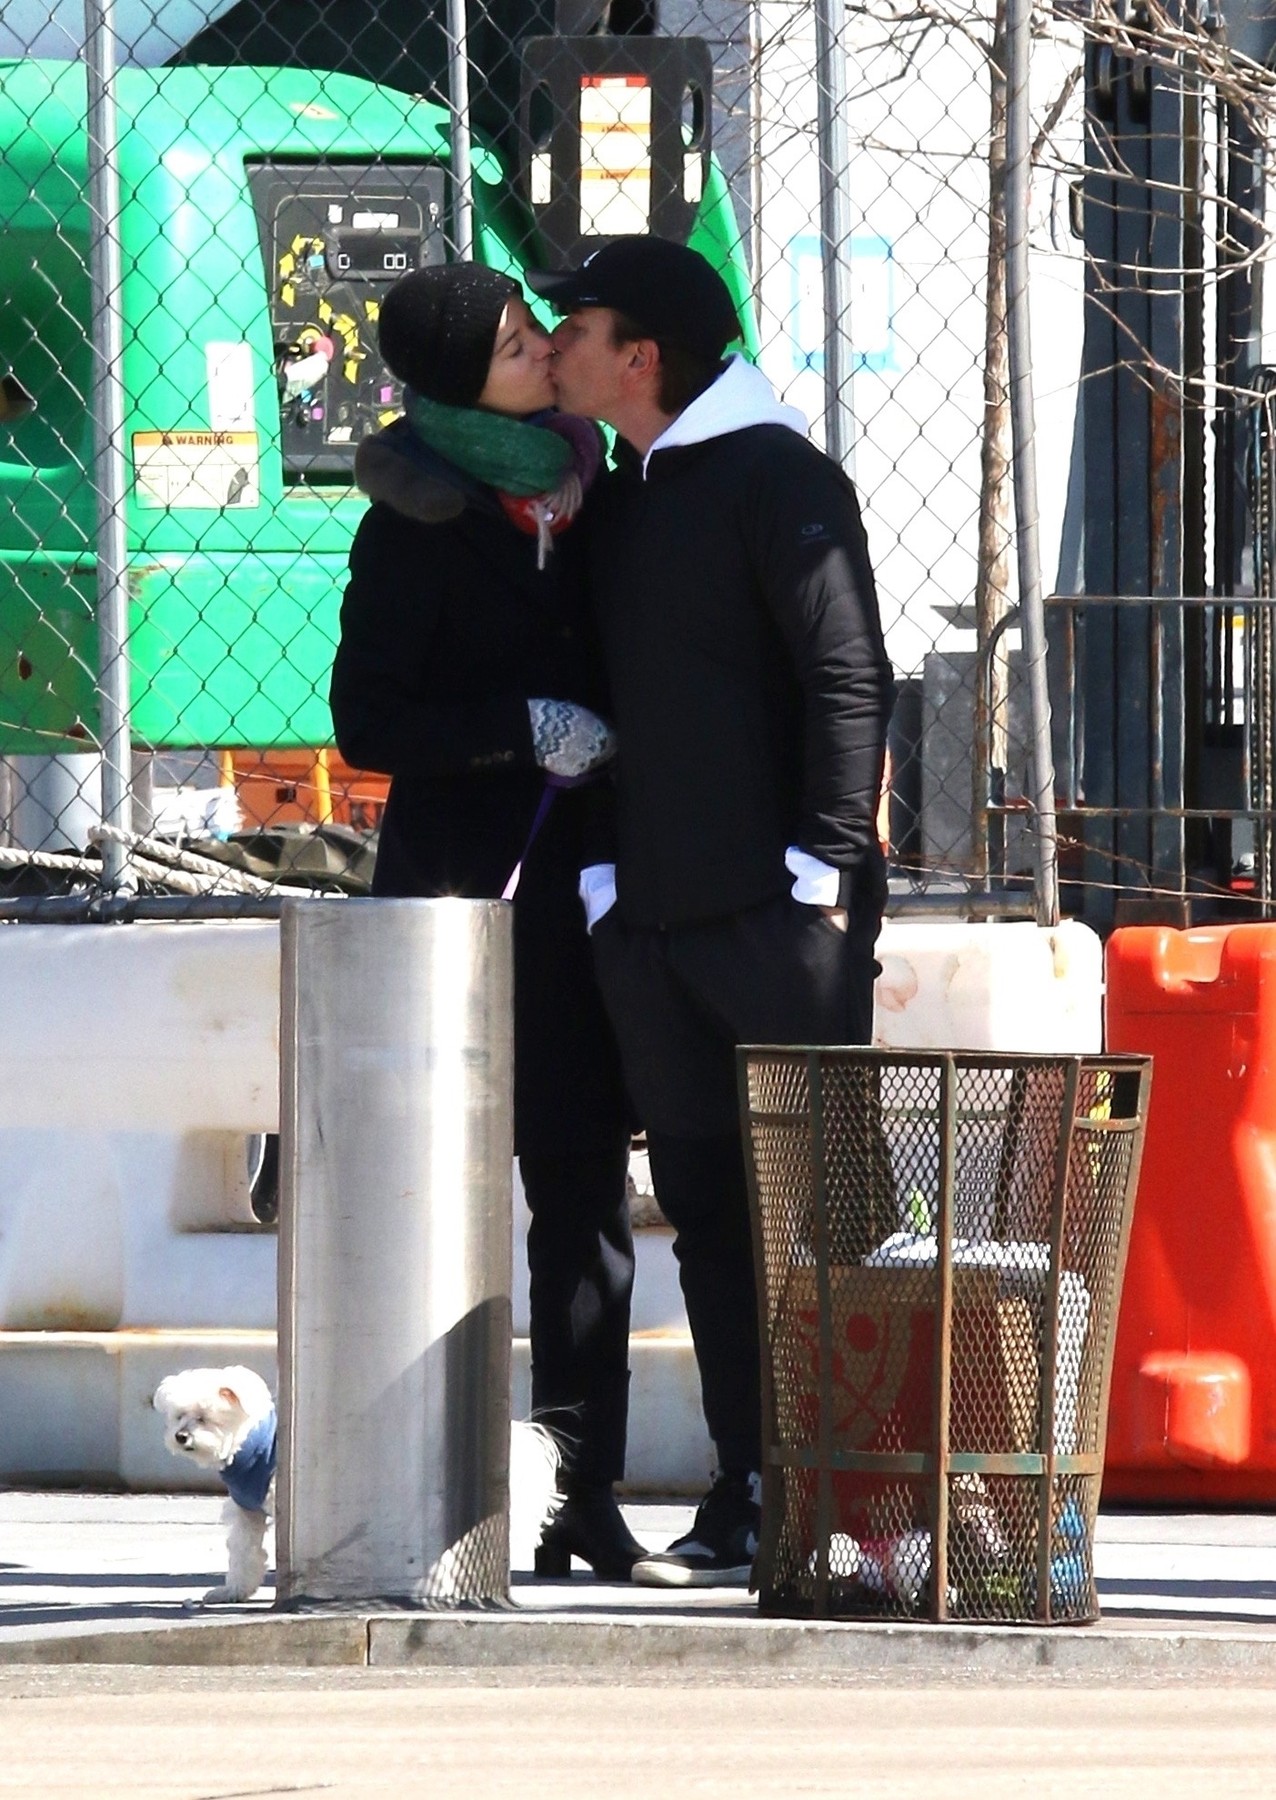 New York Cit, NY  - Ewan McGregor and girlfriend Mary Elizabeth Winstead share a passionate kiss while walking their dog in Downtown Manhattan.

BACKGRID USA 1 MARCH 2020,Image: 502184039, License: Rights-managed, Restrictions: , Model Release: no, Credit line: BrosNYC / BACKGRID / Backgrid USA / Profimedia